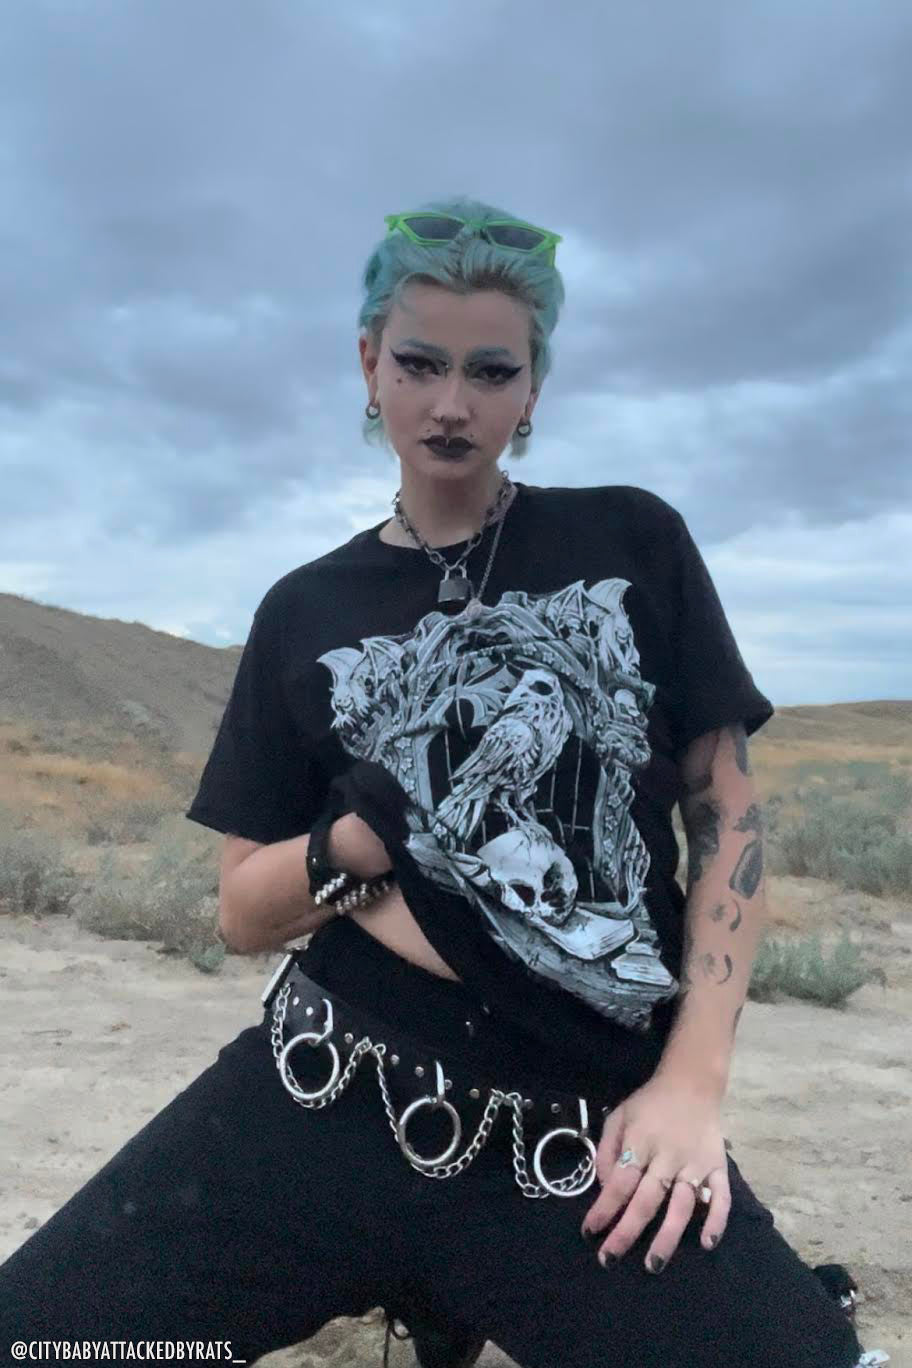 Quoth the Raven Tee [GRAY] [Multiple Styles Available]